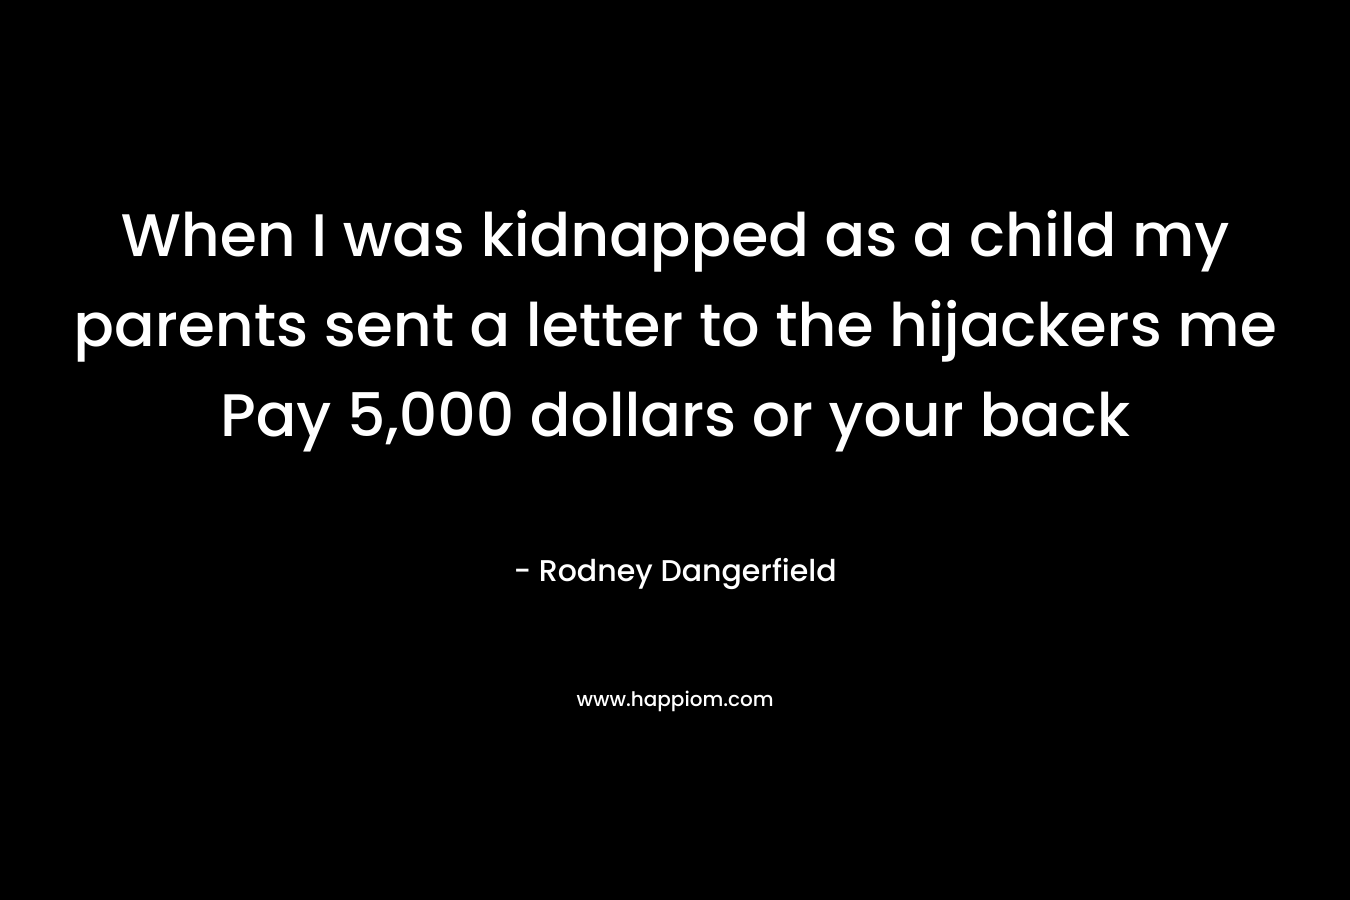 When I was kidnapped as a child my parents sent a letter to the hijackers me Pay 5,000 dollars or your back – Rodney Dangerfield